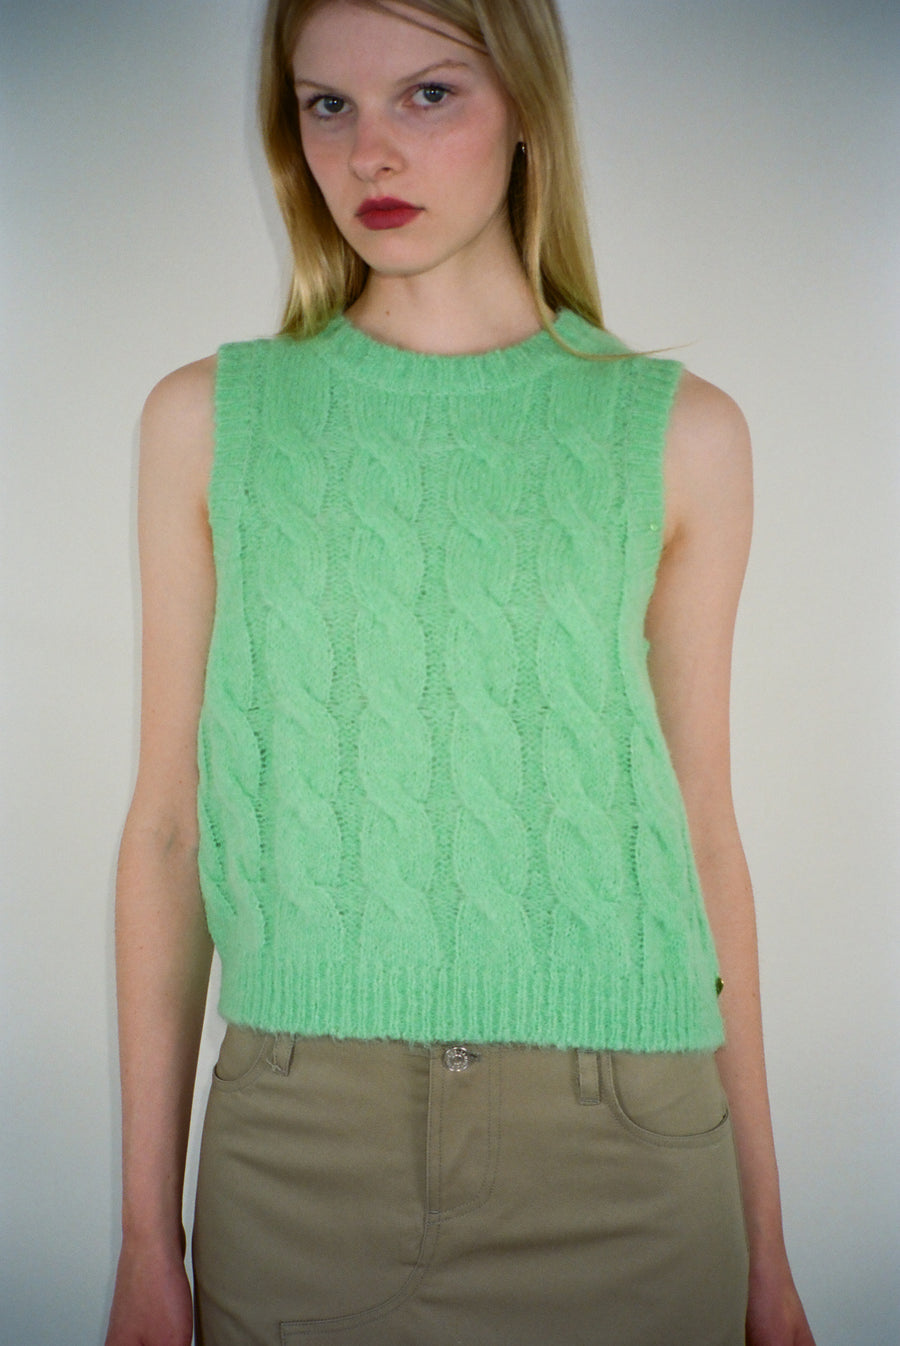 Cable knit sweater vest in lime green on model